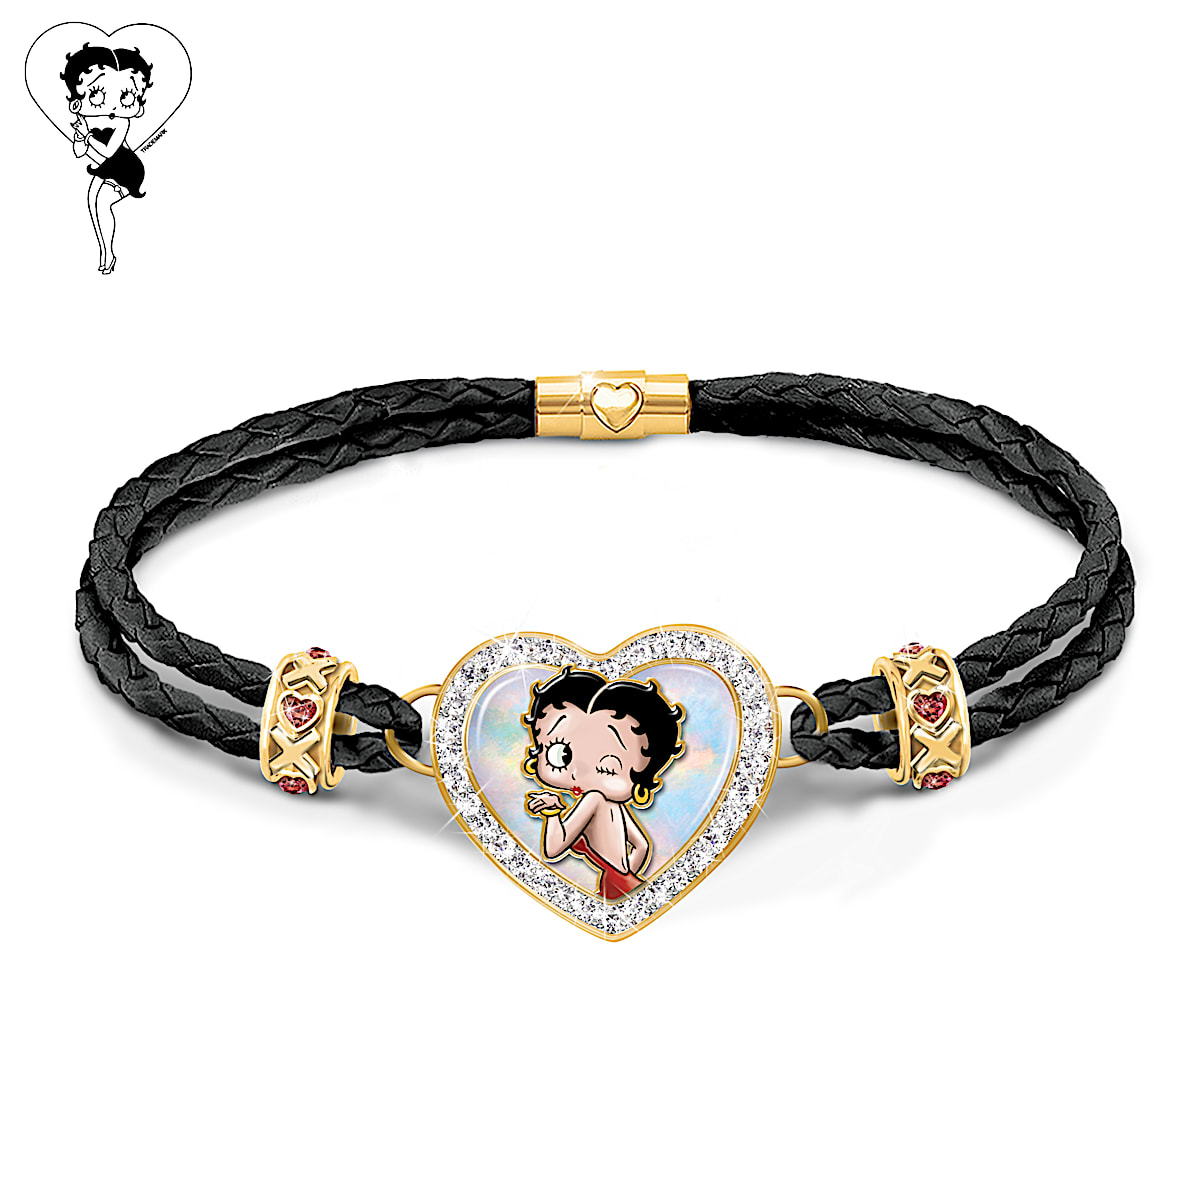 XOXO Betty Boop Black Leather Bracelet Featuring A Heart-Shaped Charm Set  With A Mother-Of-Pearl Inlay And Adorned With Clear Crystals